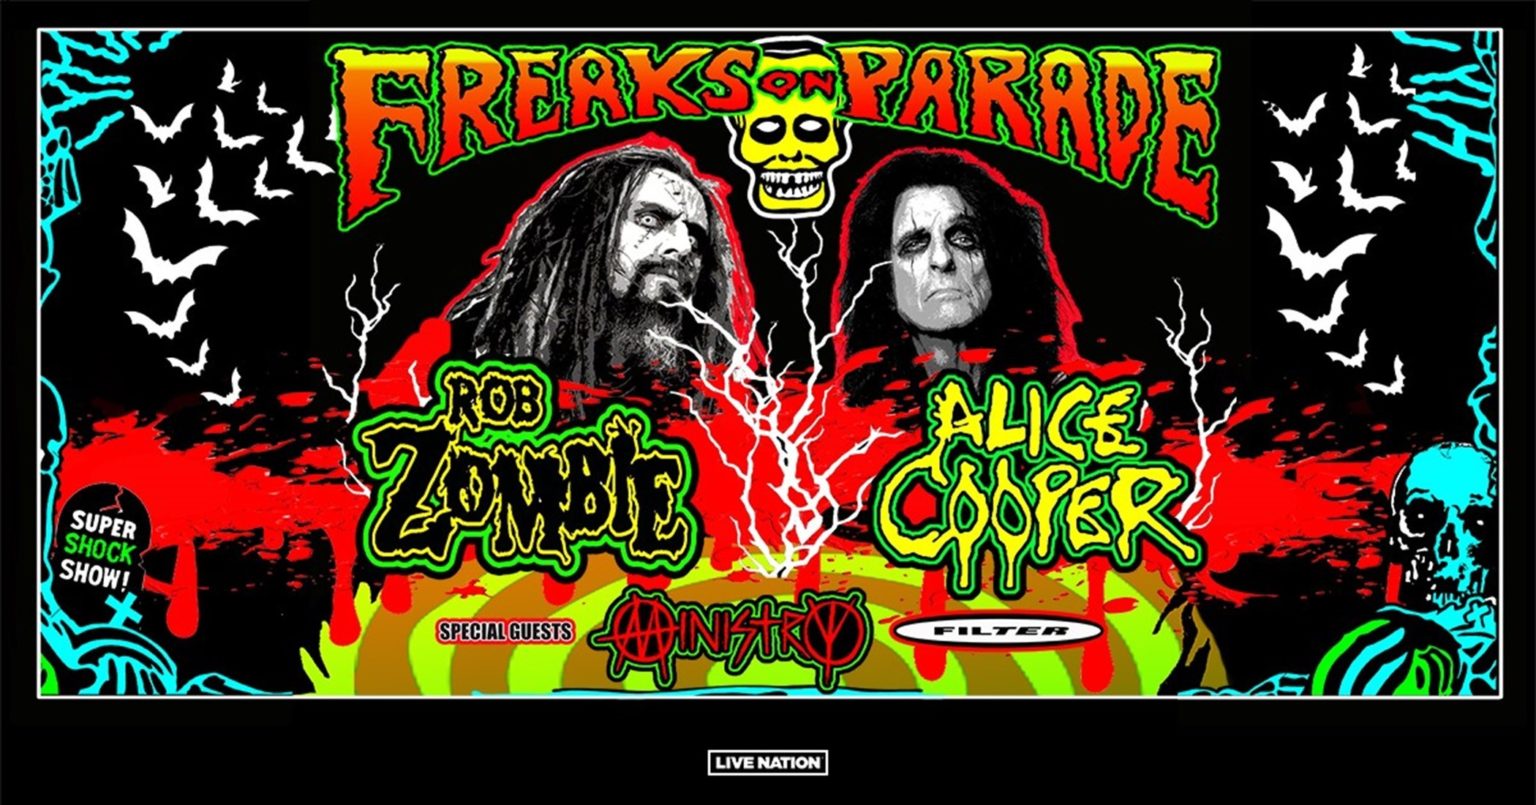 Rob Zombie And Alice Cooper Announce 'Freaks On Parade' Tour That